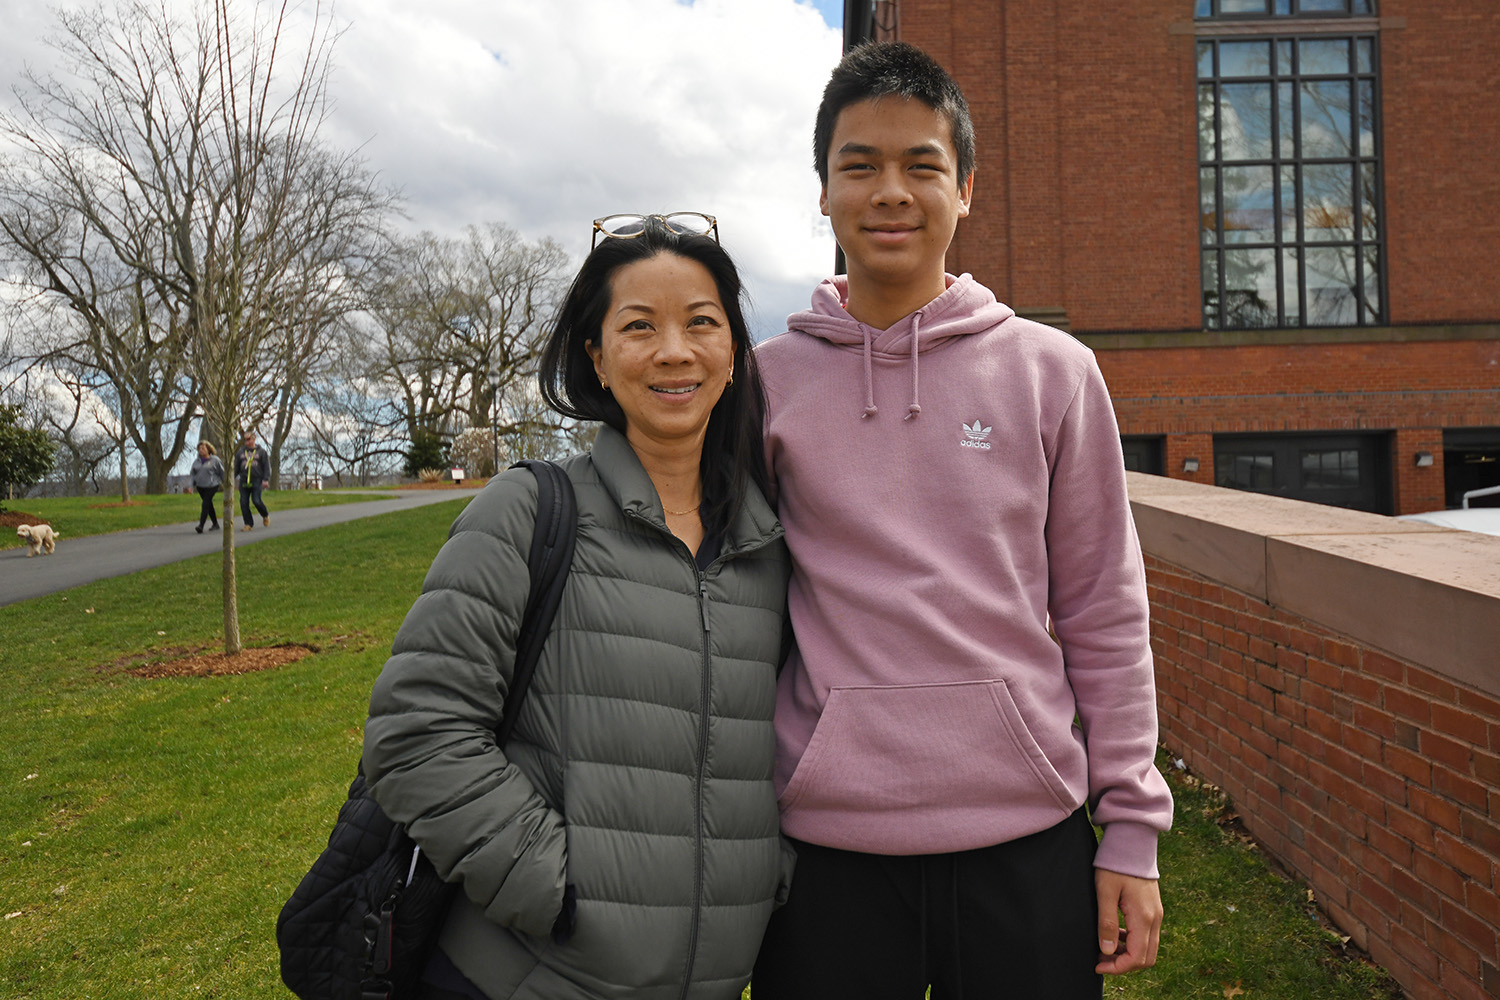 Thai Buu-Hohn P'26 and her son, Marcus, attended the Shamans course